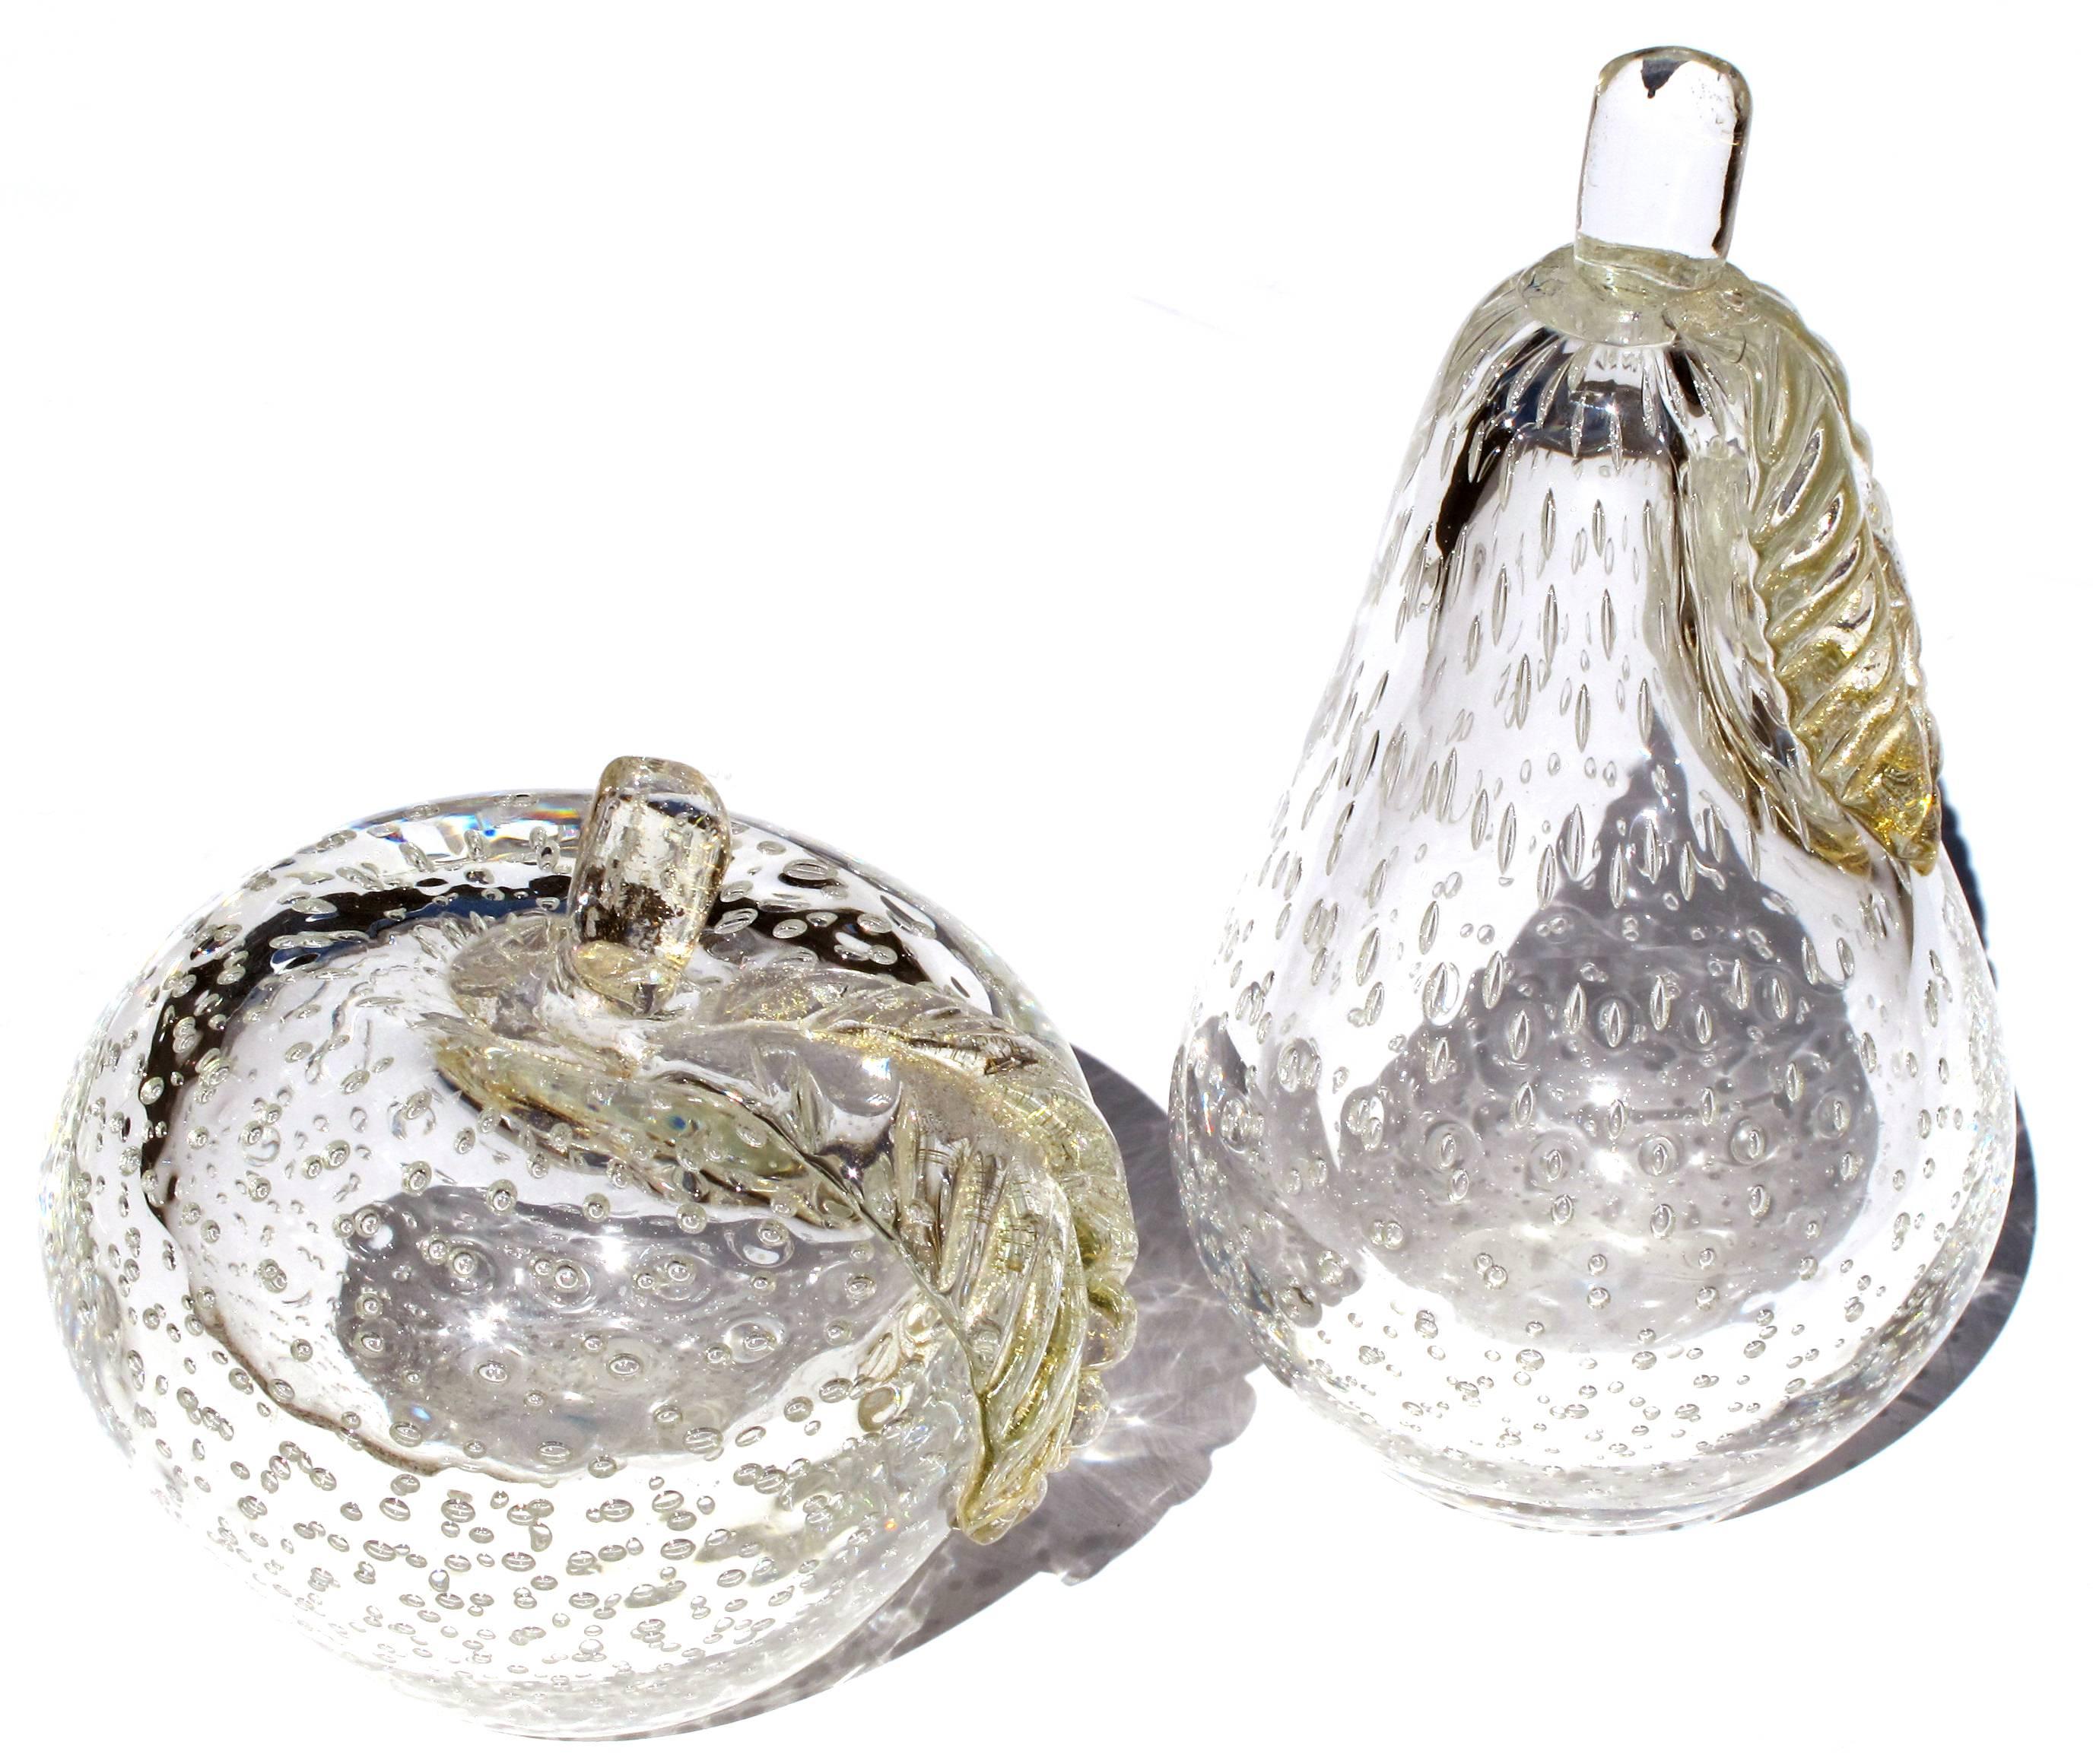 A beautifully crafted and large-scaled Murano 1950's clear art glass bullicante apple and pear with gold inclusions; by Barbini Sommerso; each shapely fruit with stem and leaf above a thickly-modeled body